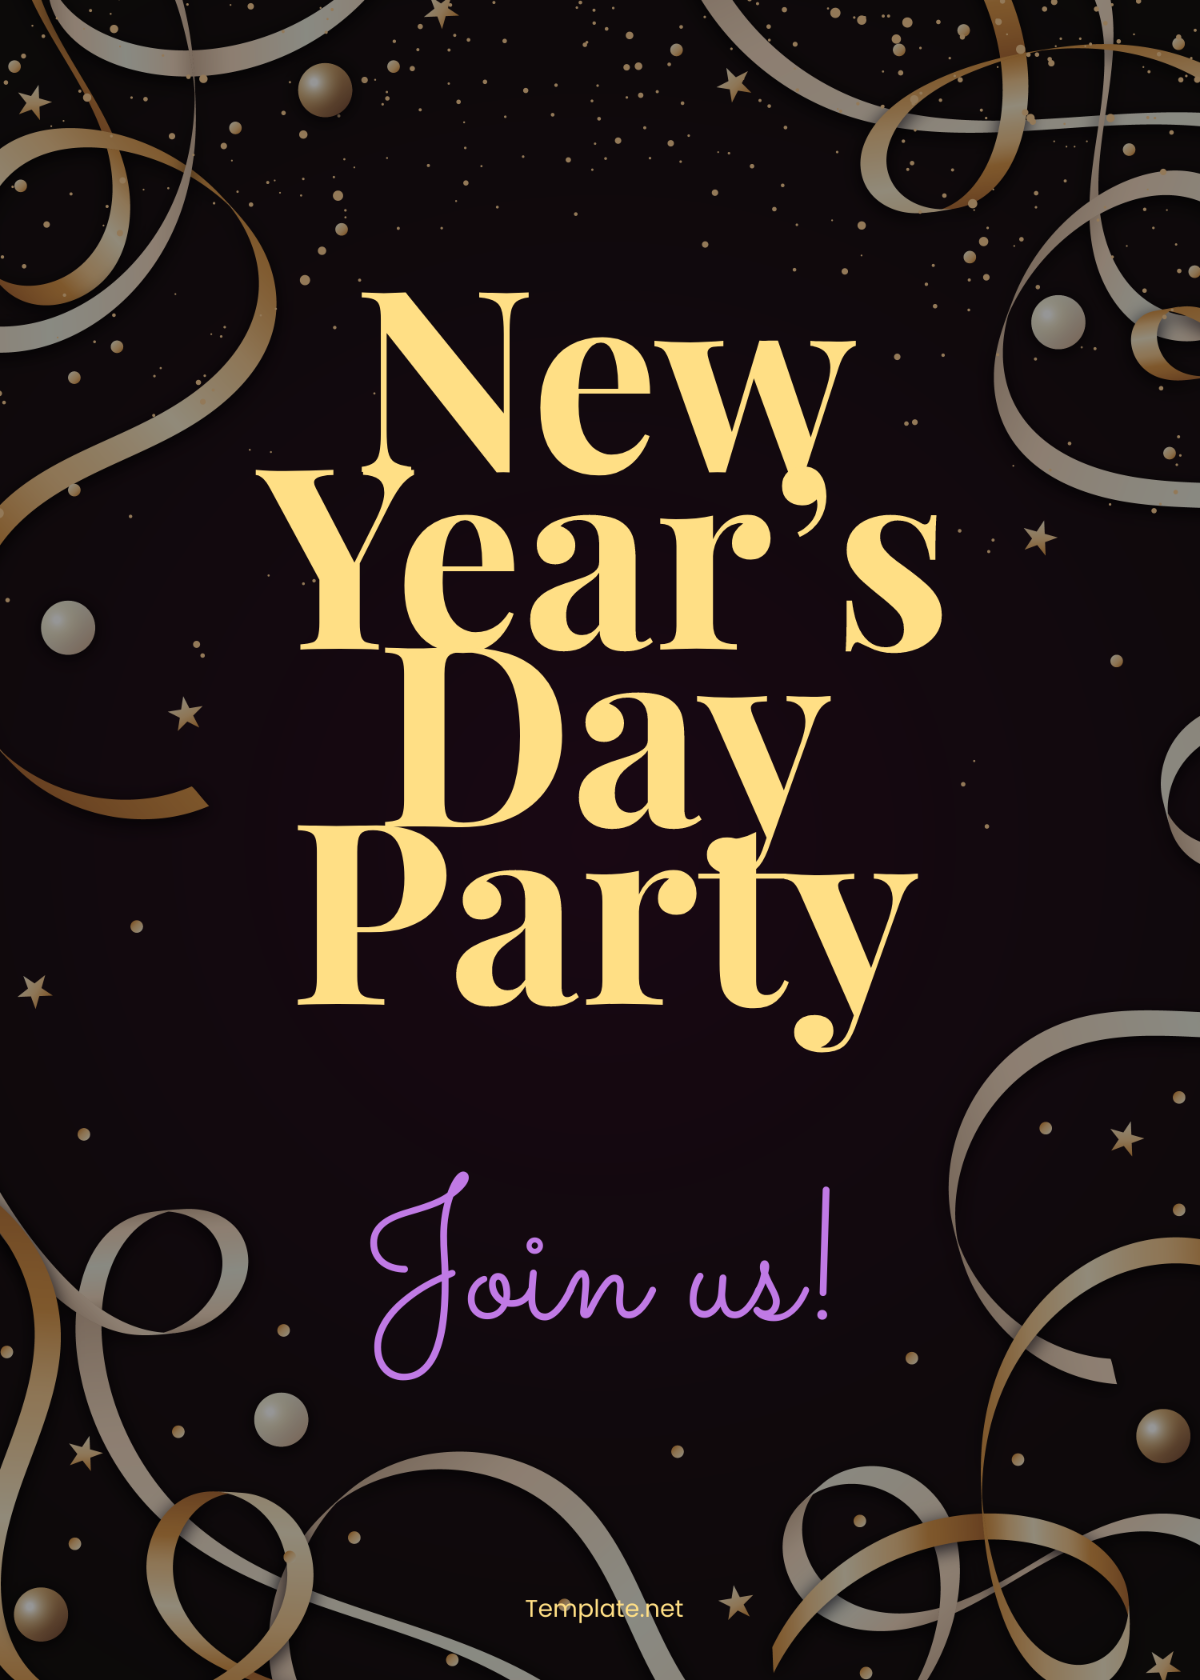 New Year's Day Party Invitation